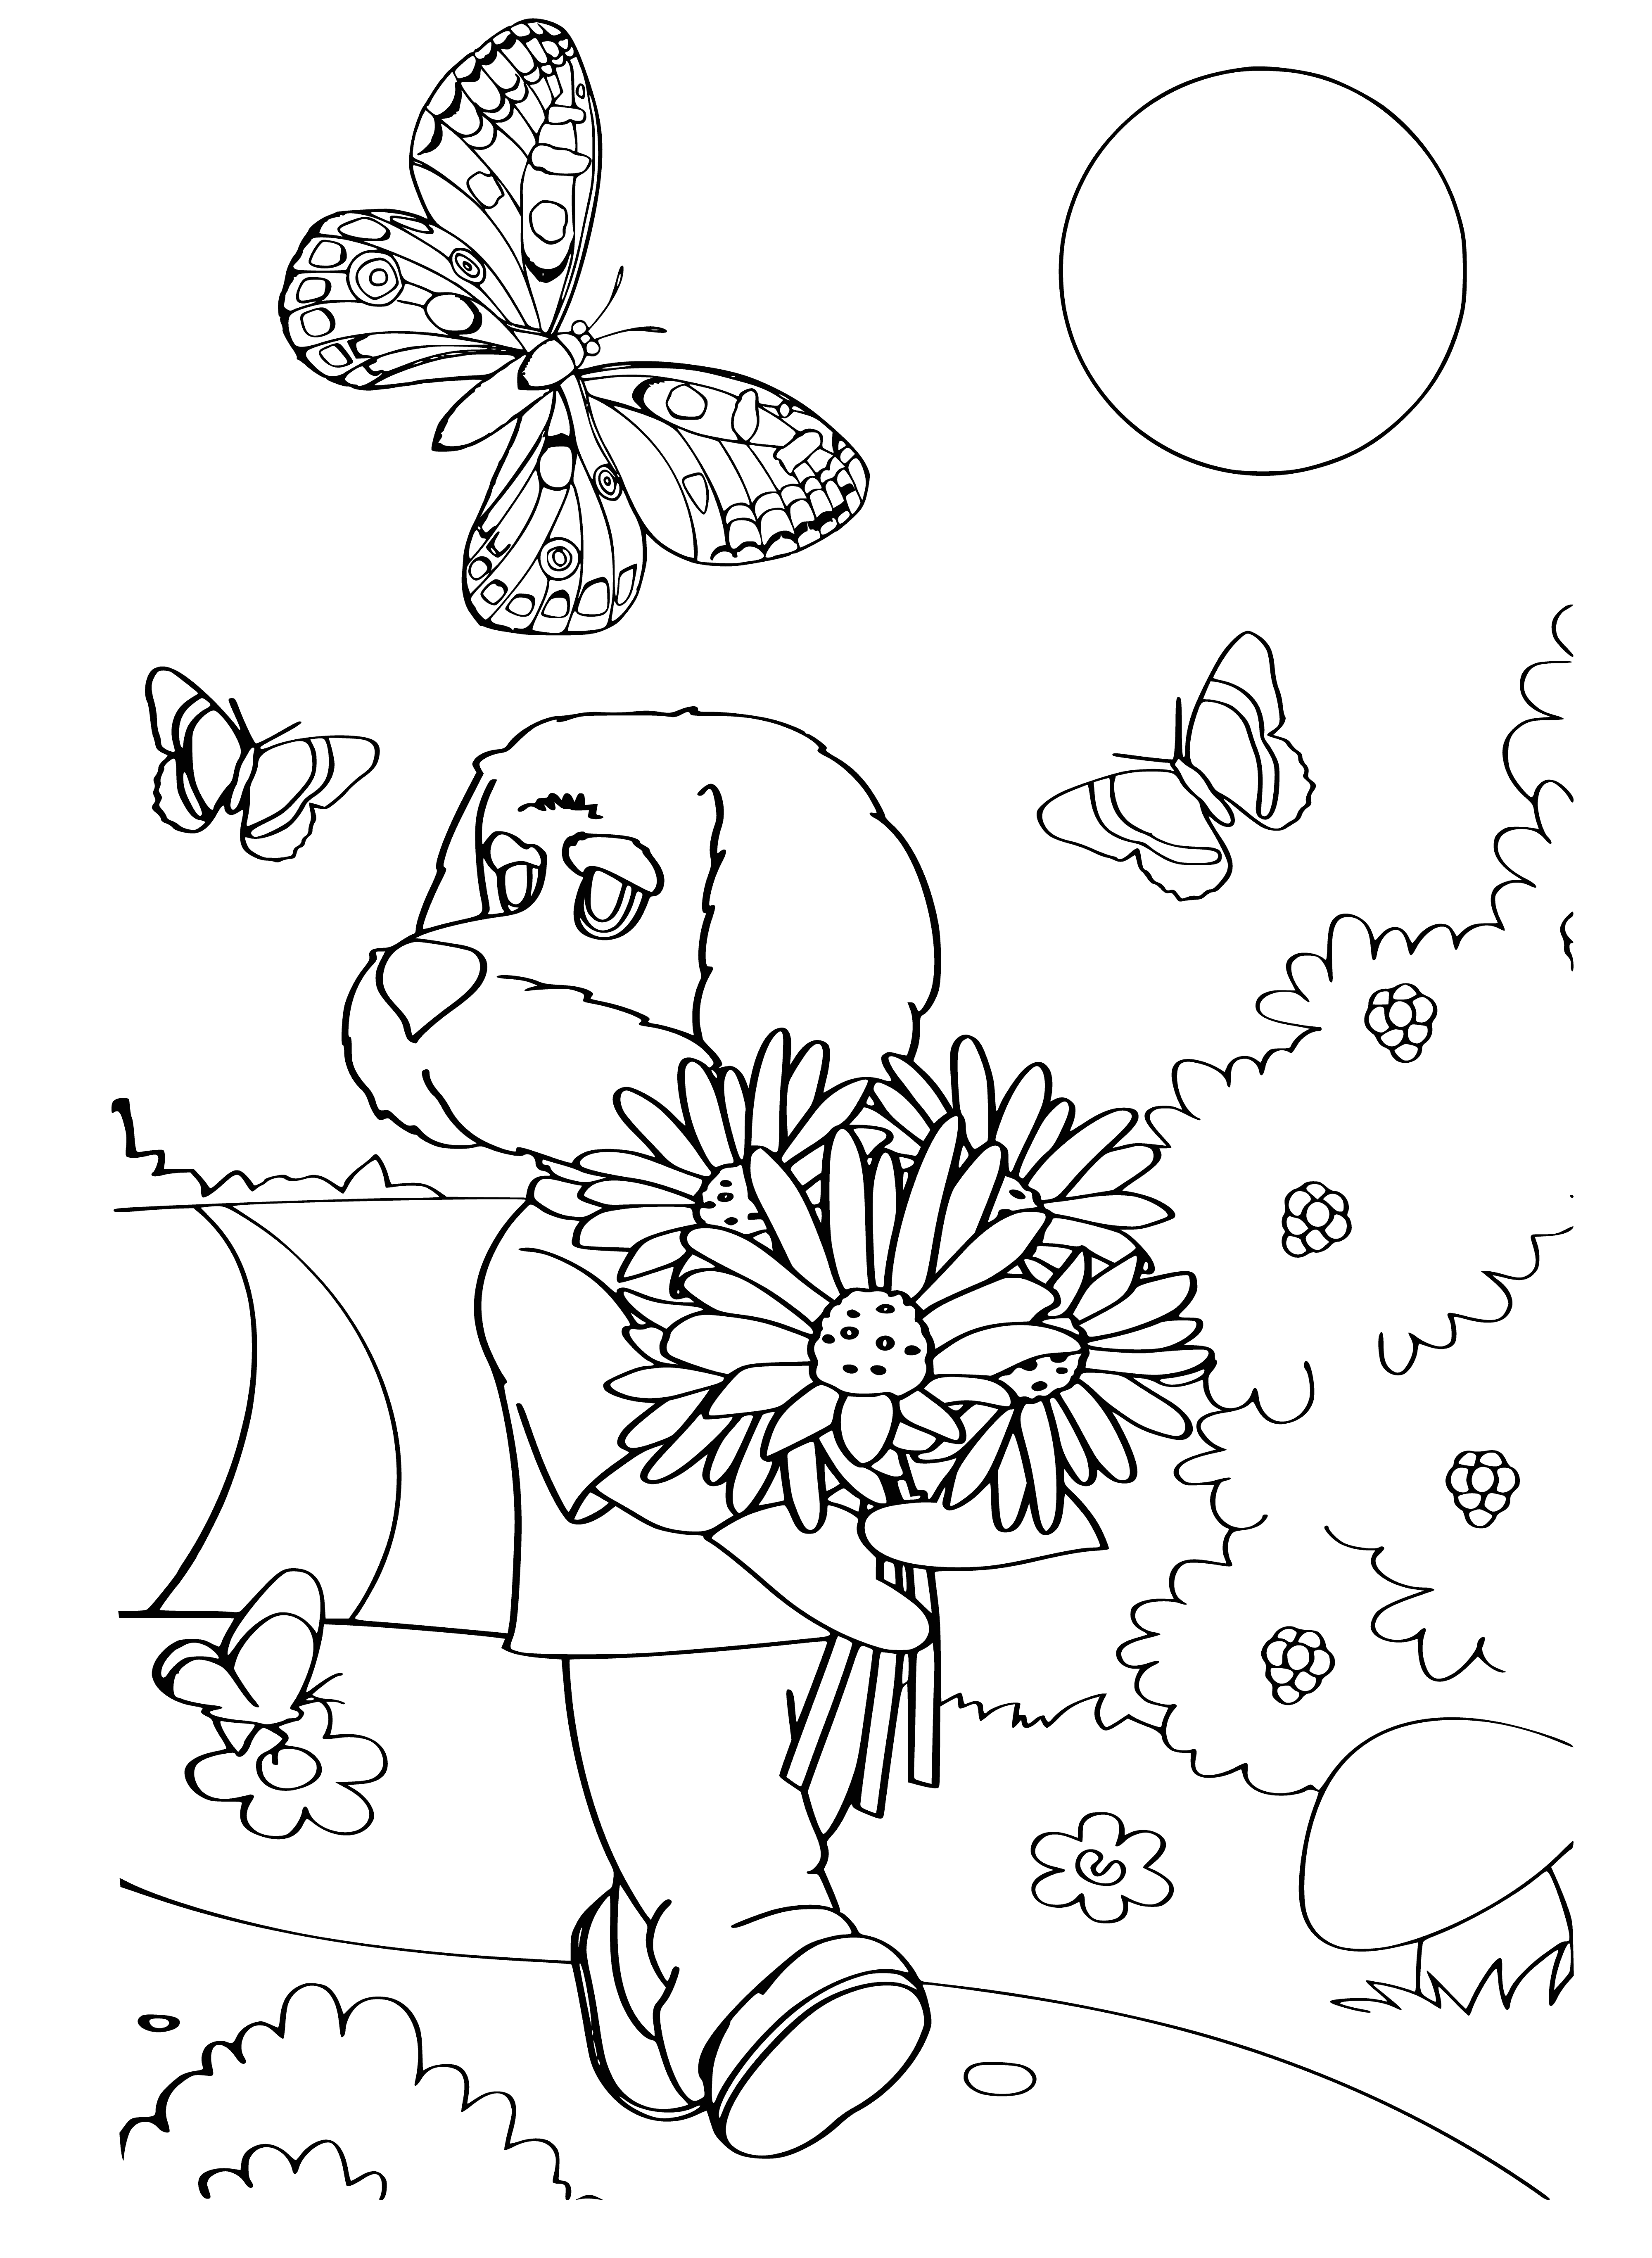 coloring page: Boy & girl sit on bench, leaning against each other, looking up at stars w/ boy's arm around her.